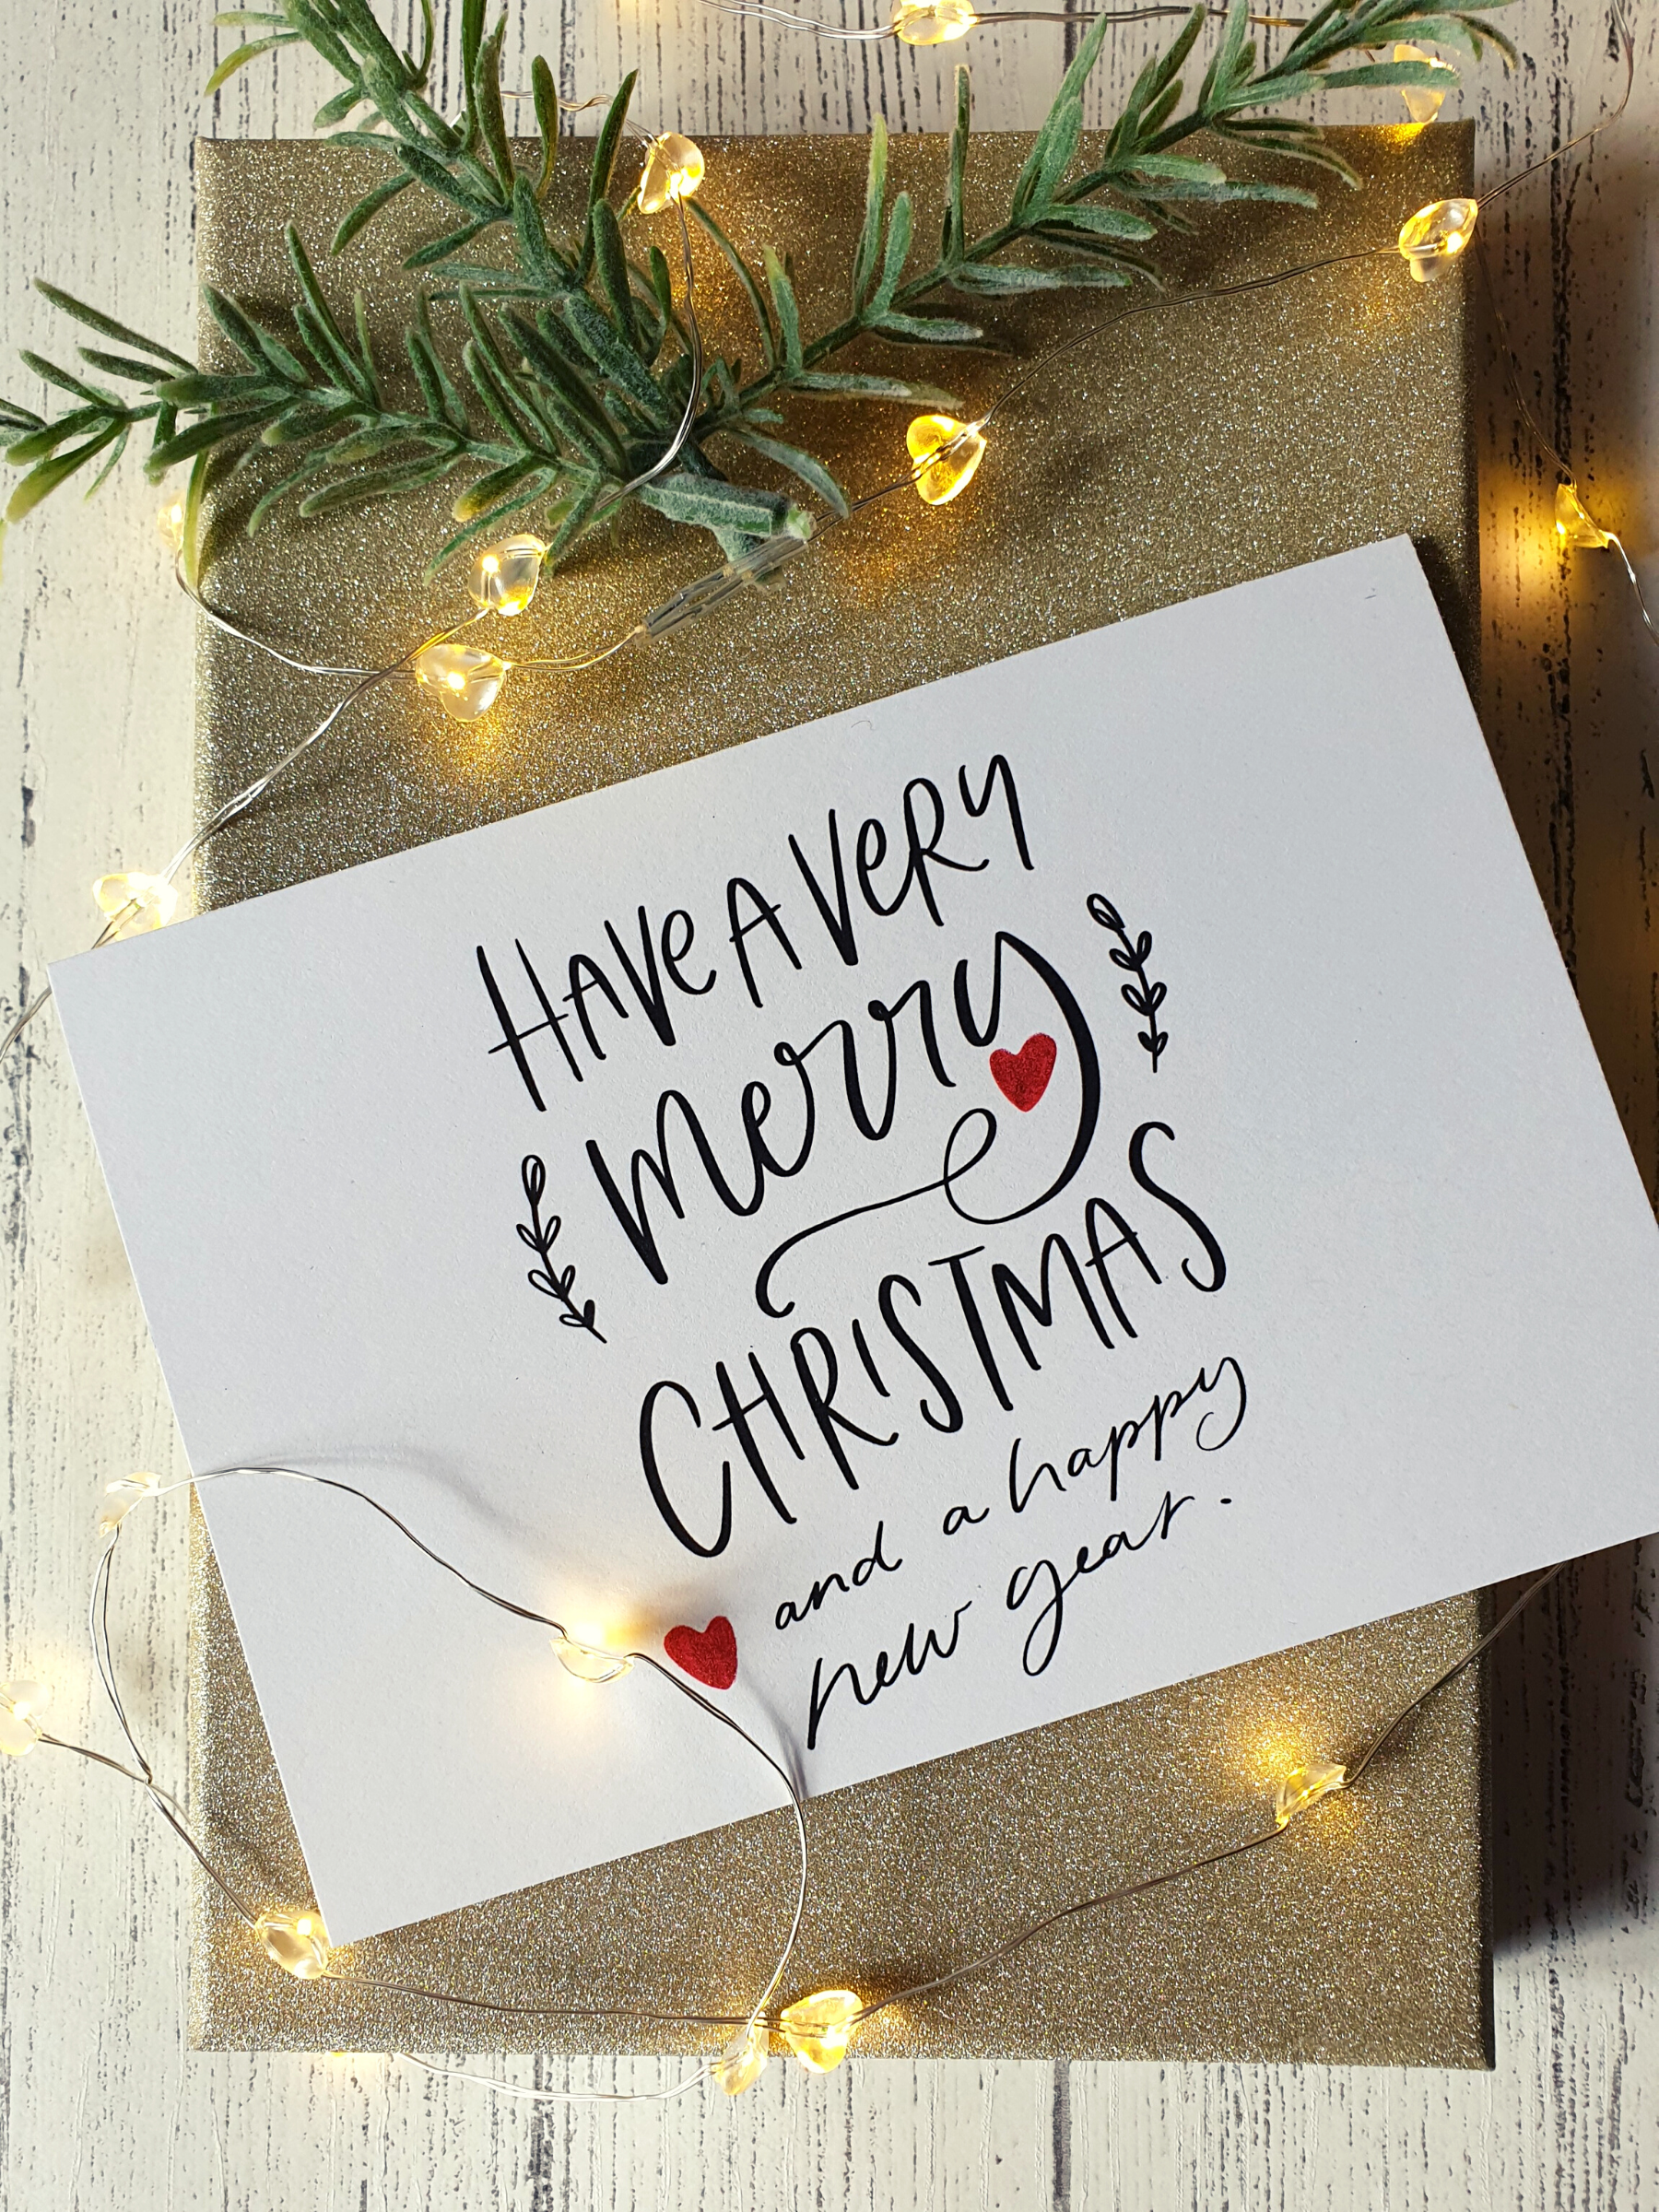 Poppleberry A6 Size 'Very Merry Christmas' Red Heart Calligraphy Folded Christmas Card.